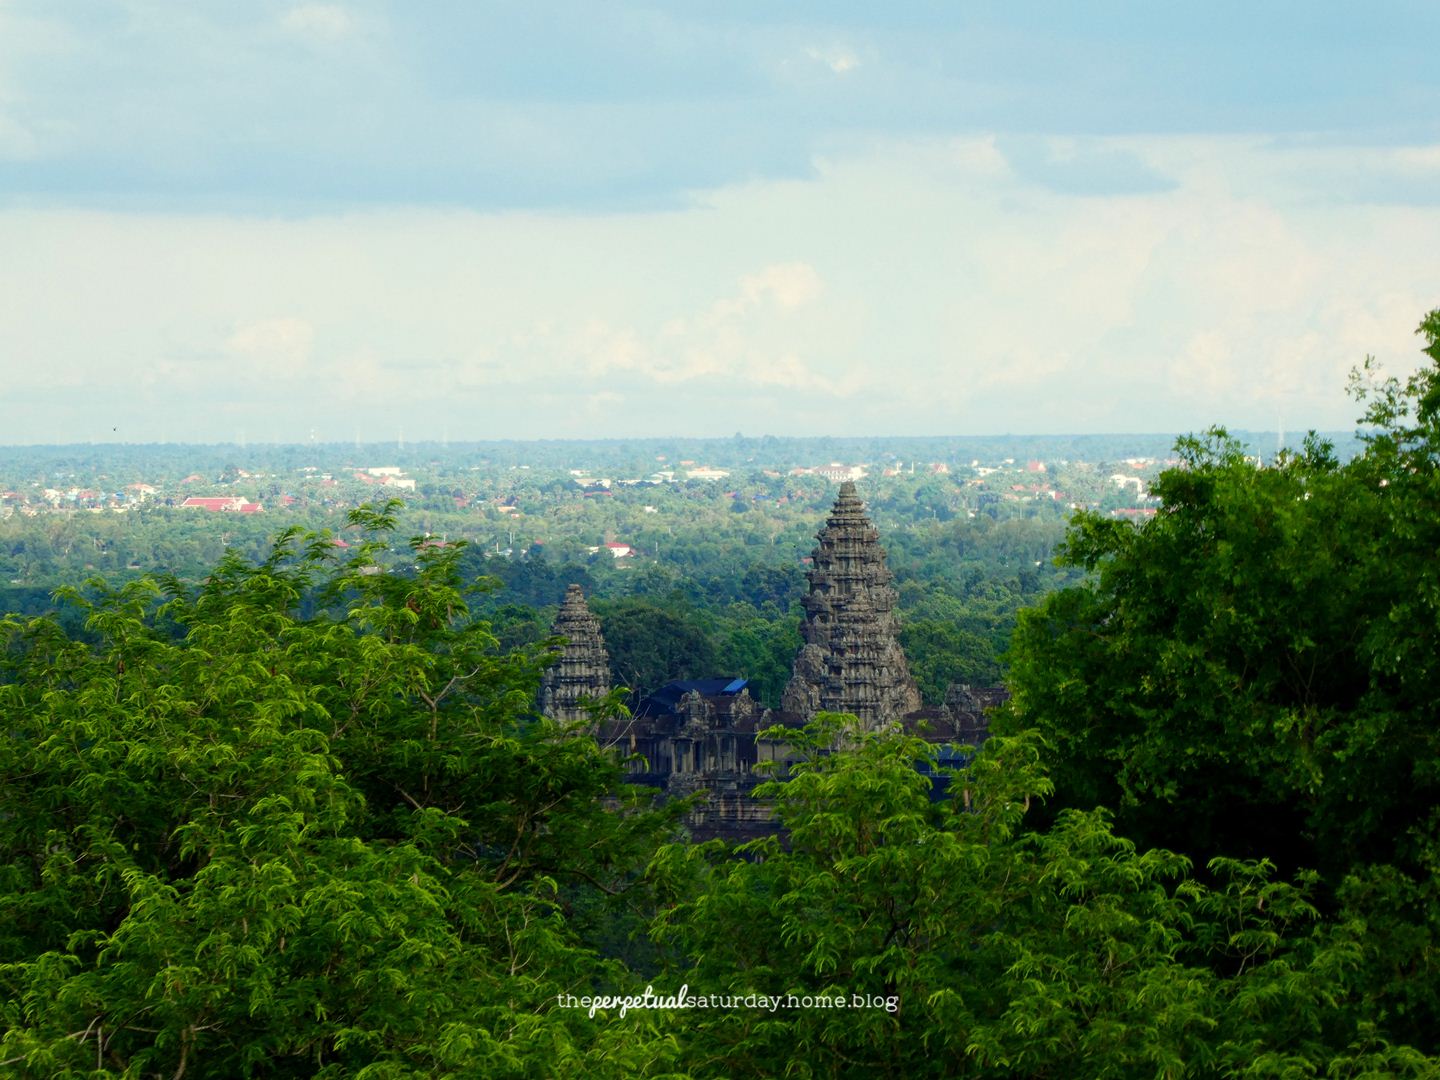 View of Angkor Wat from the top of Phnom Bakheng. It's obscured by trees.